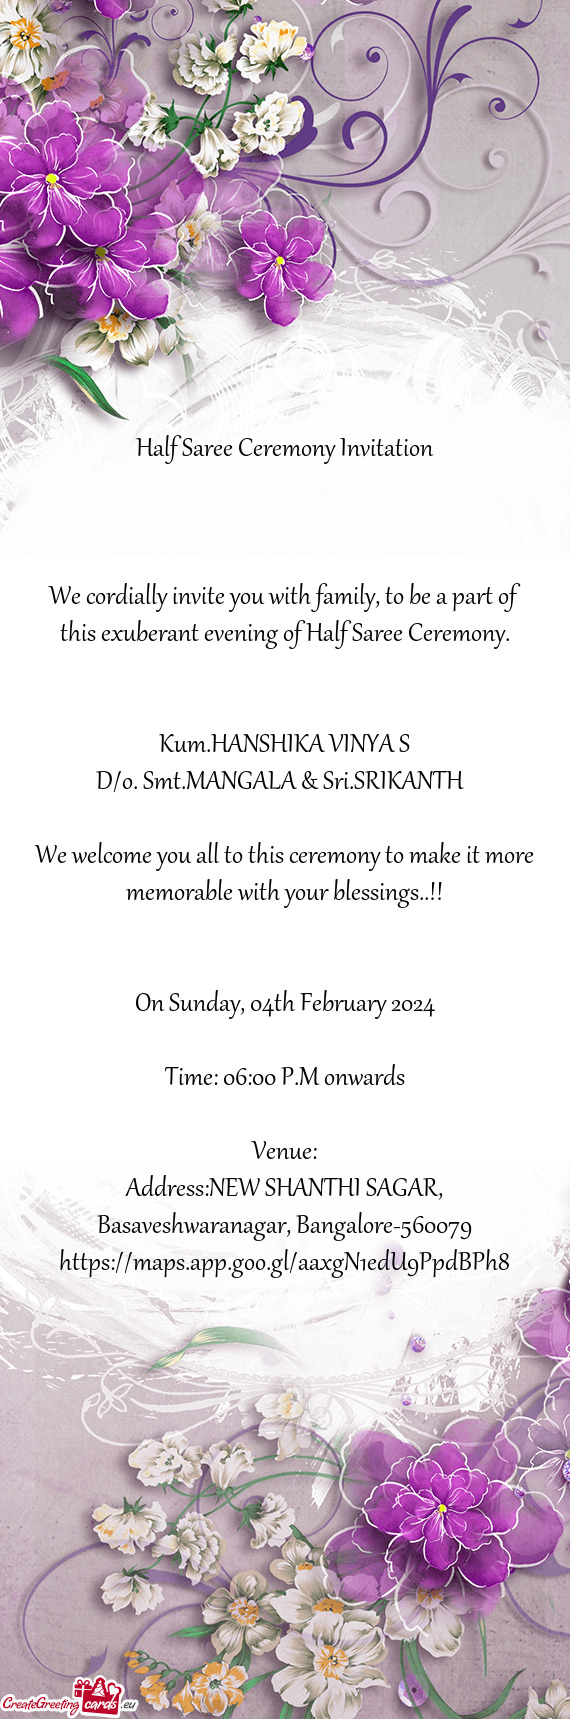 We cordially invite you with family, to be a part of this exuberant evening of Half Saree Ceremony